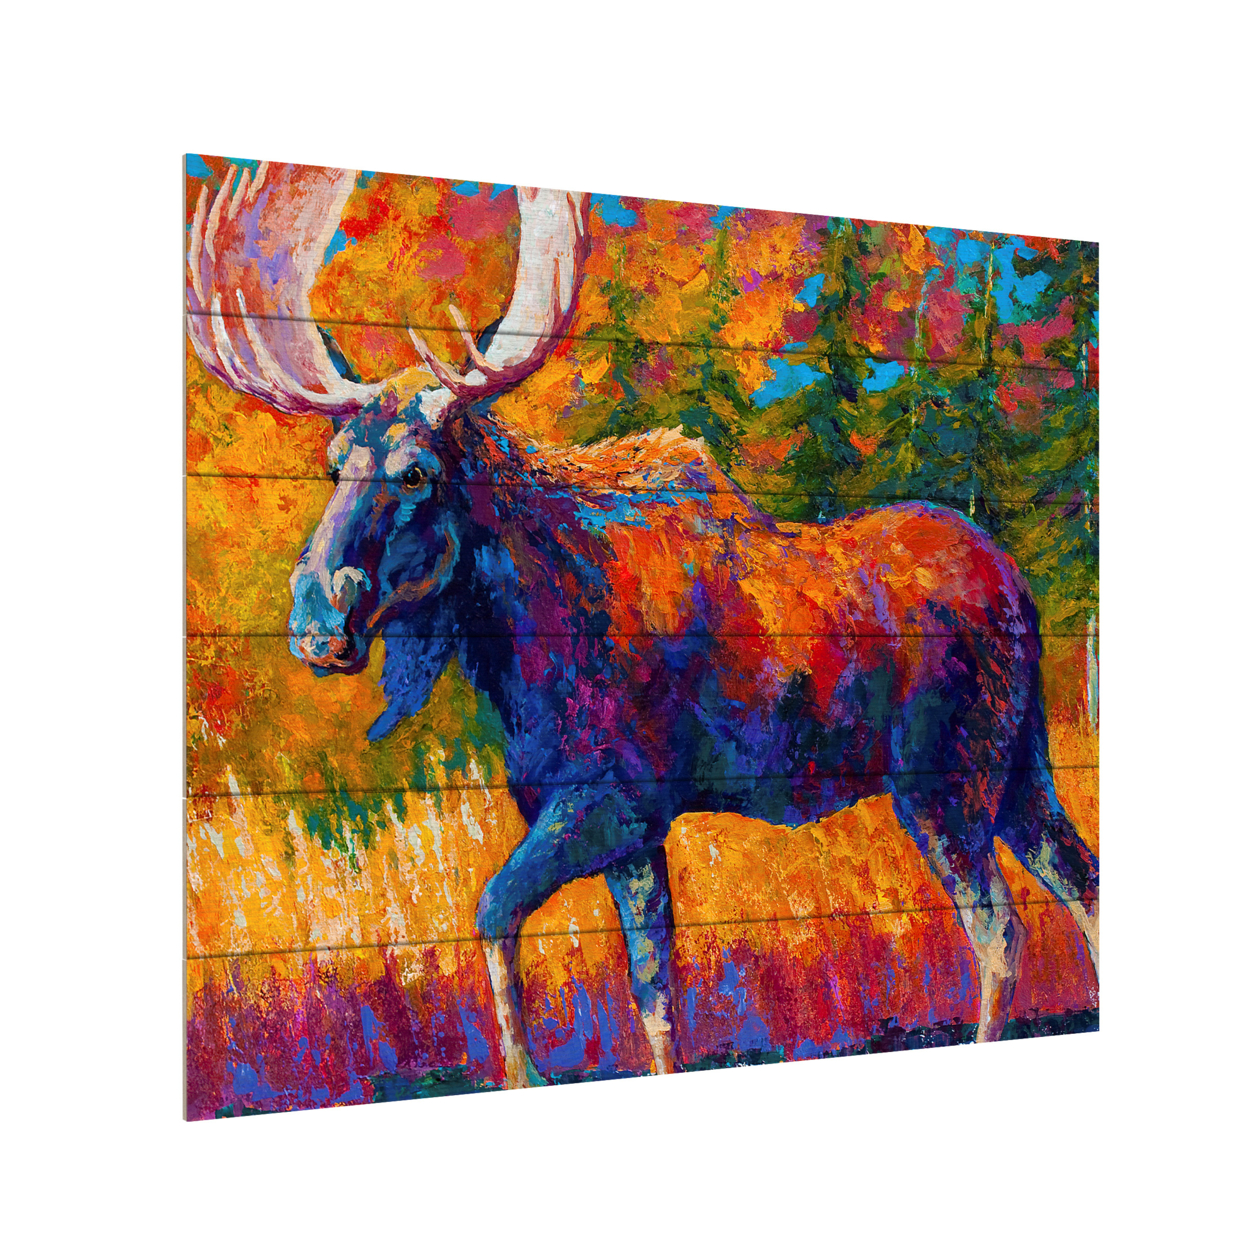 Wooden Slat Art 18 X 22 Inches Titled Moose Encounter Ready To Hang Home Decor Picture